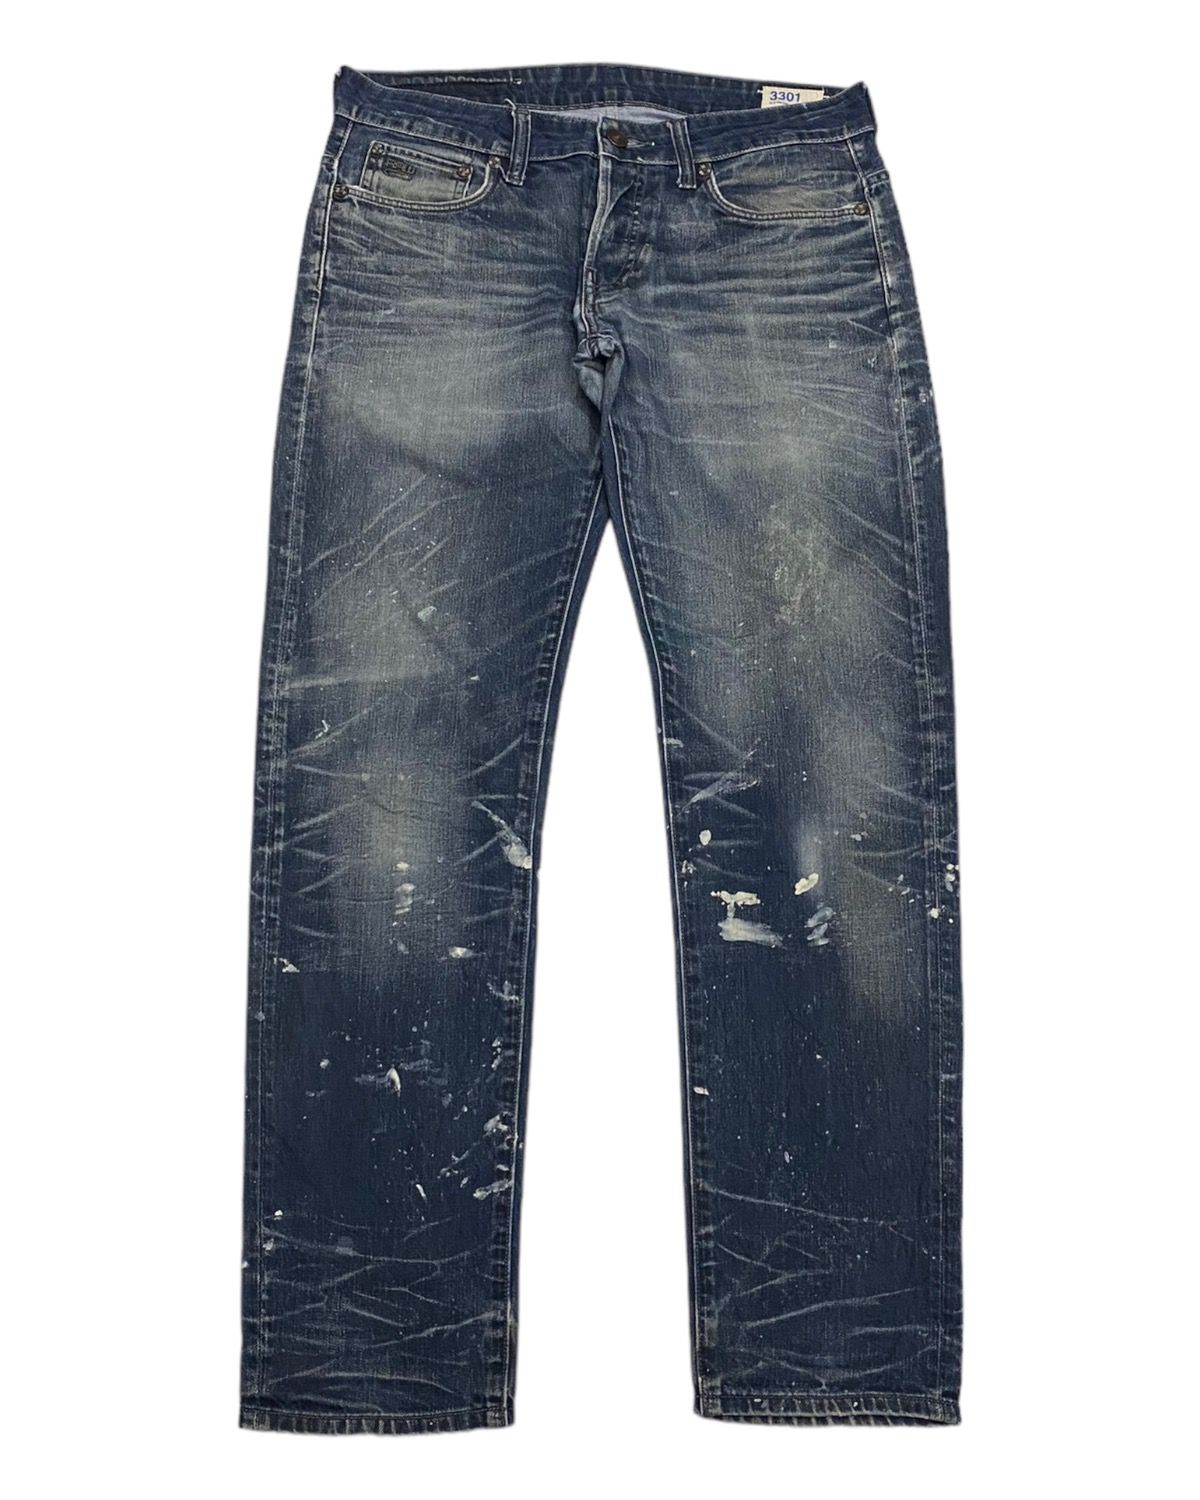 Archival Clothing - G-STAR RAW DISTRESSED PAINTED 3301 UNDERCOVER STYLE JEANS - 9